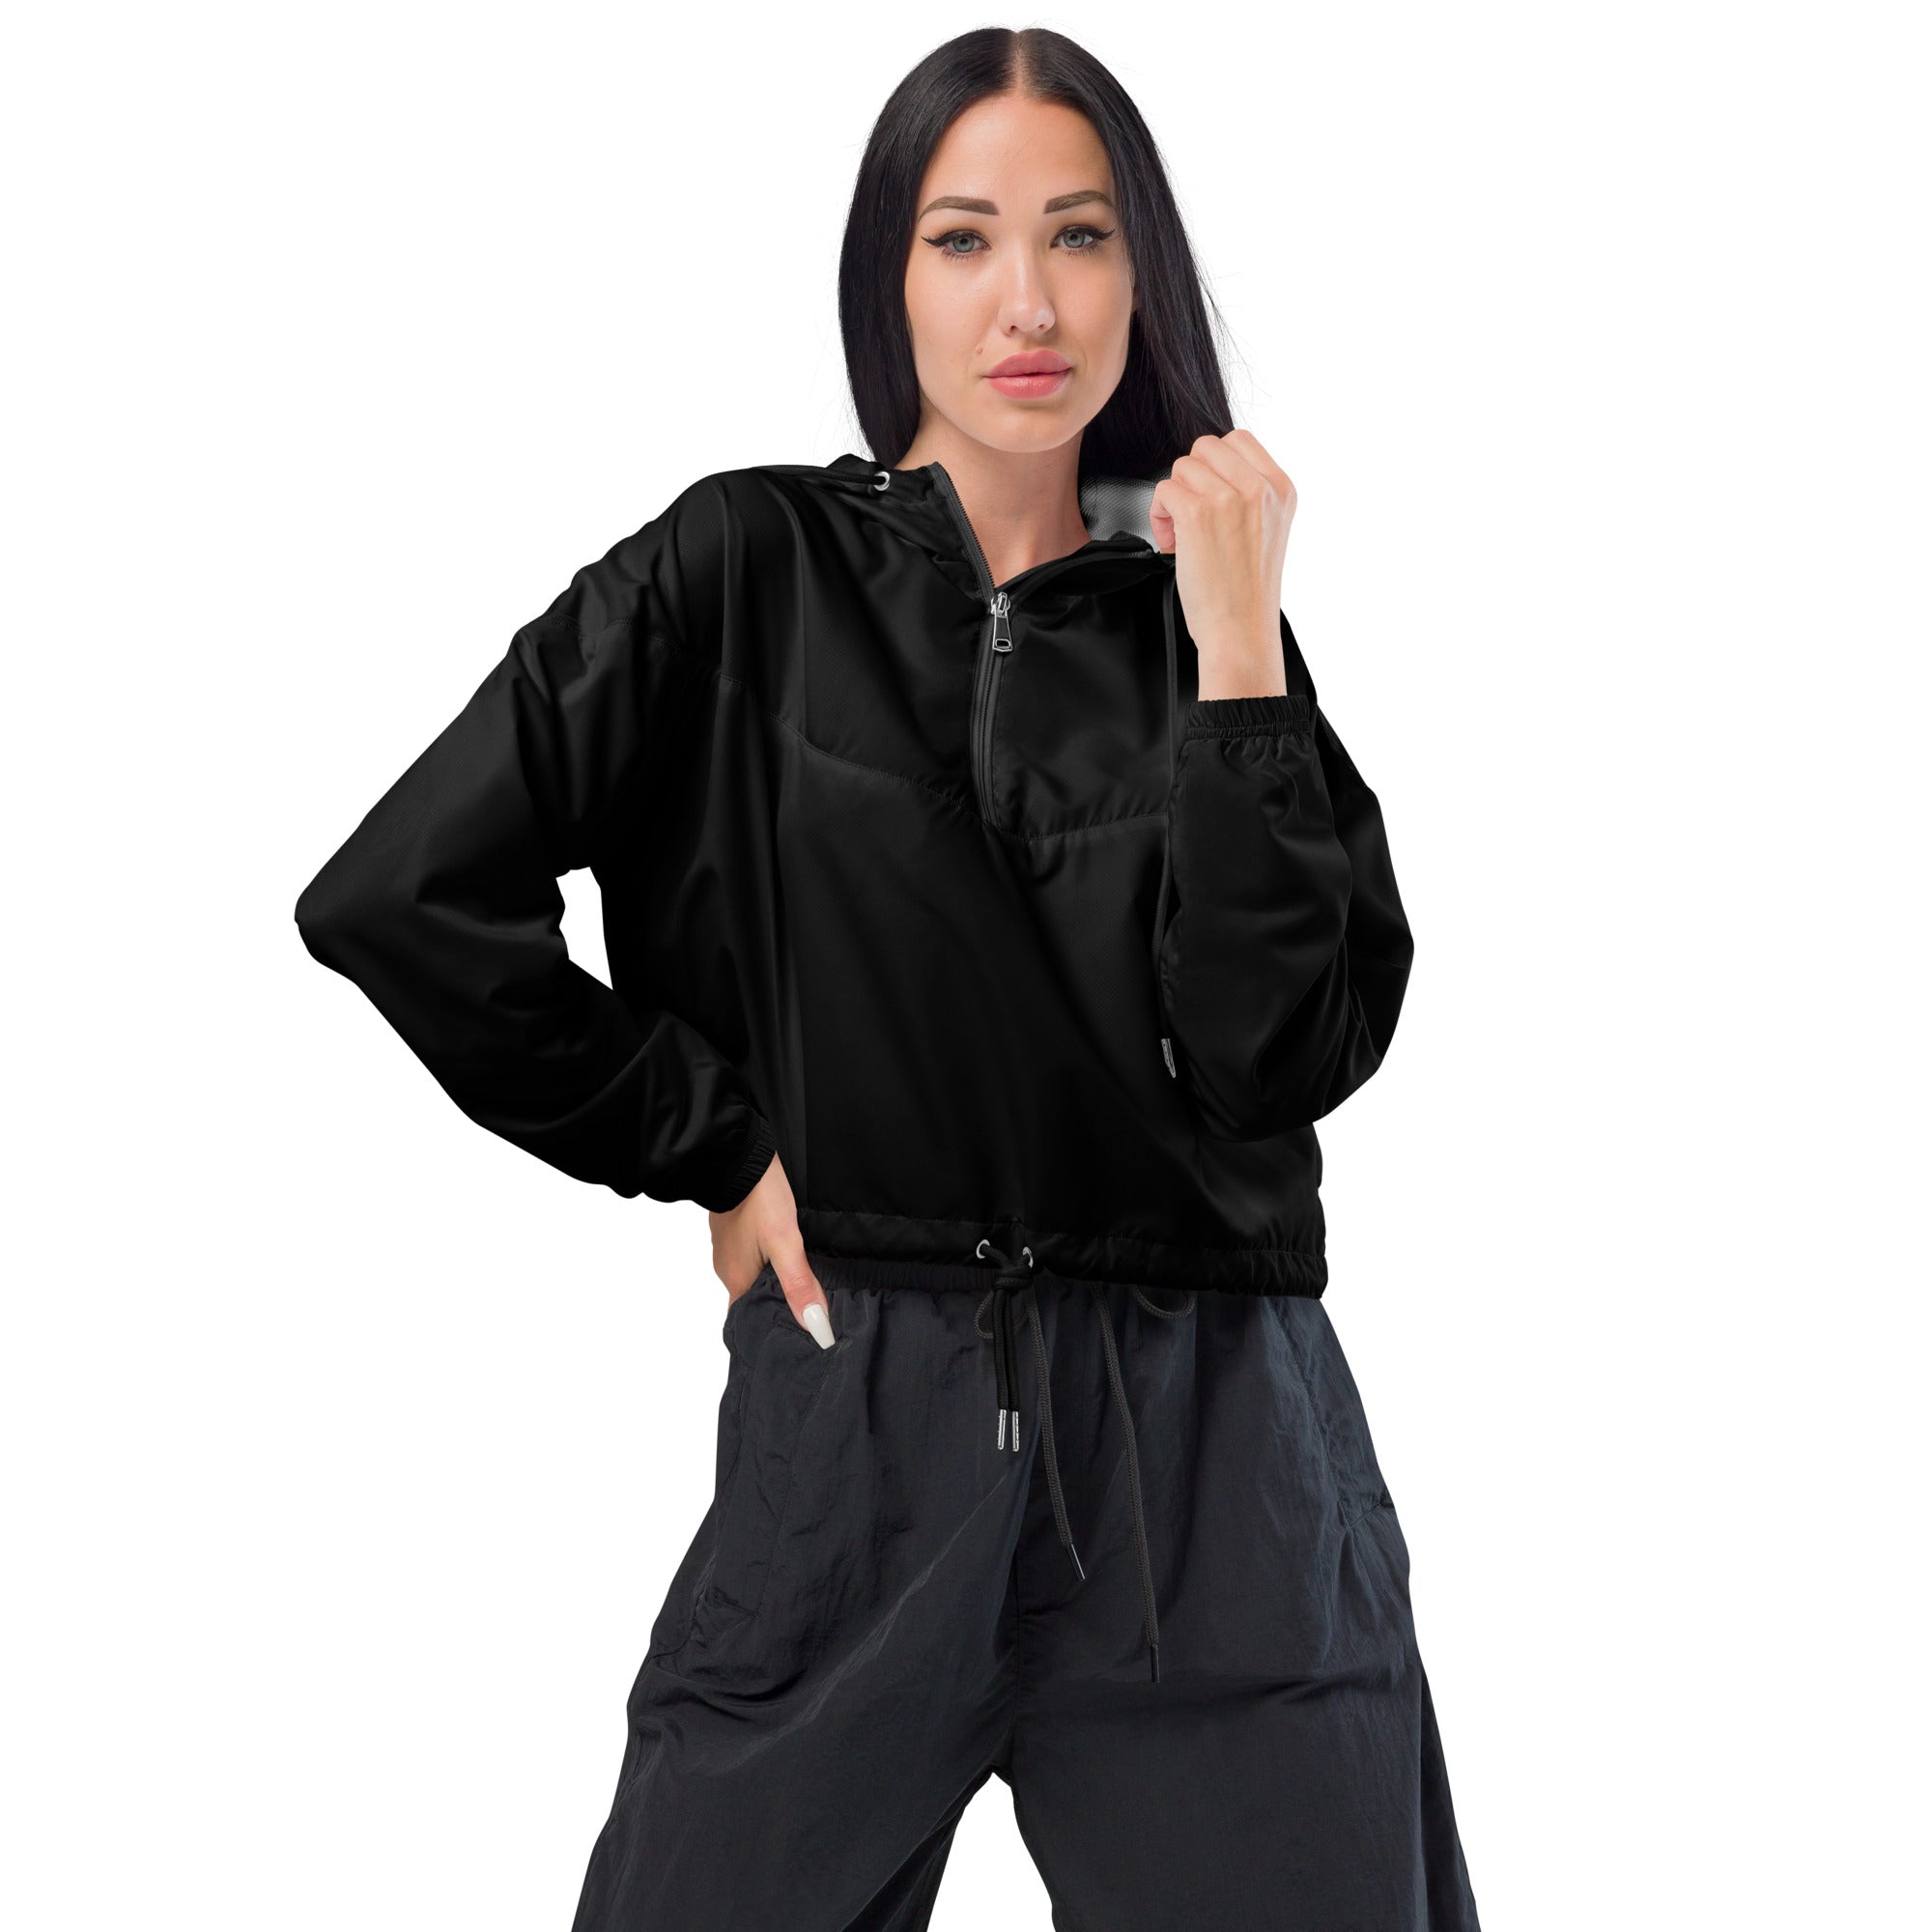 all-over-print-womens-cropped-windbreaker-black-front-64d577dc8bc5d.jpg